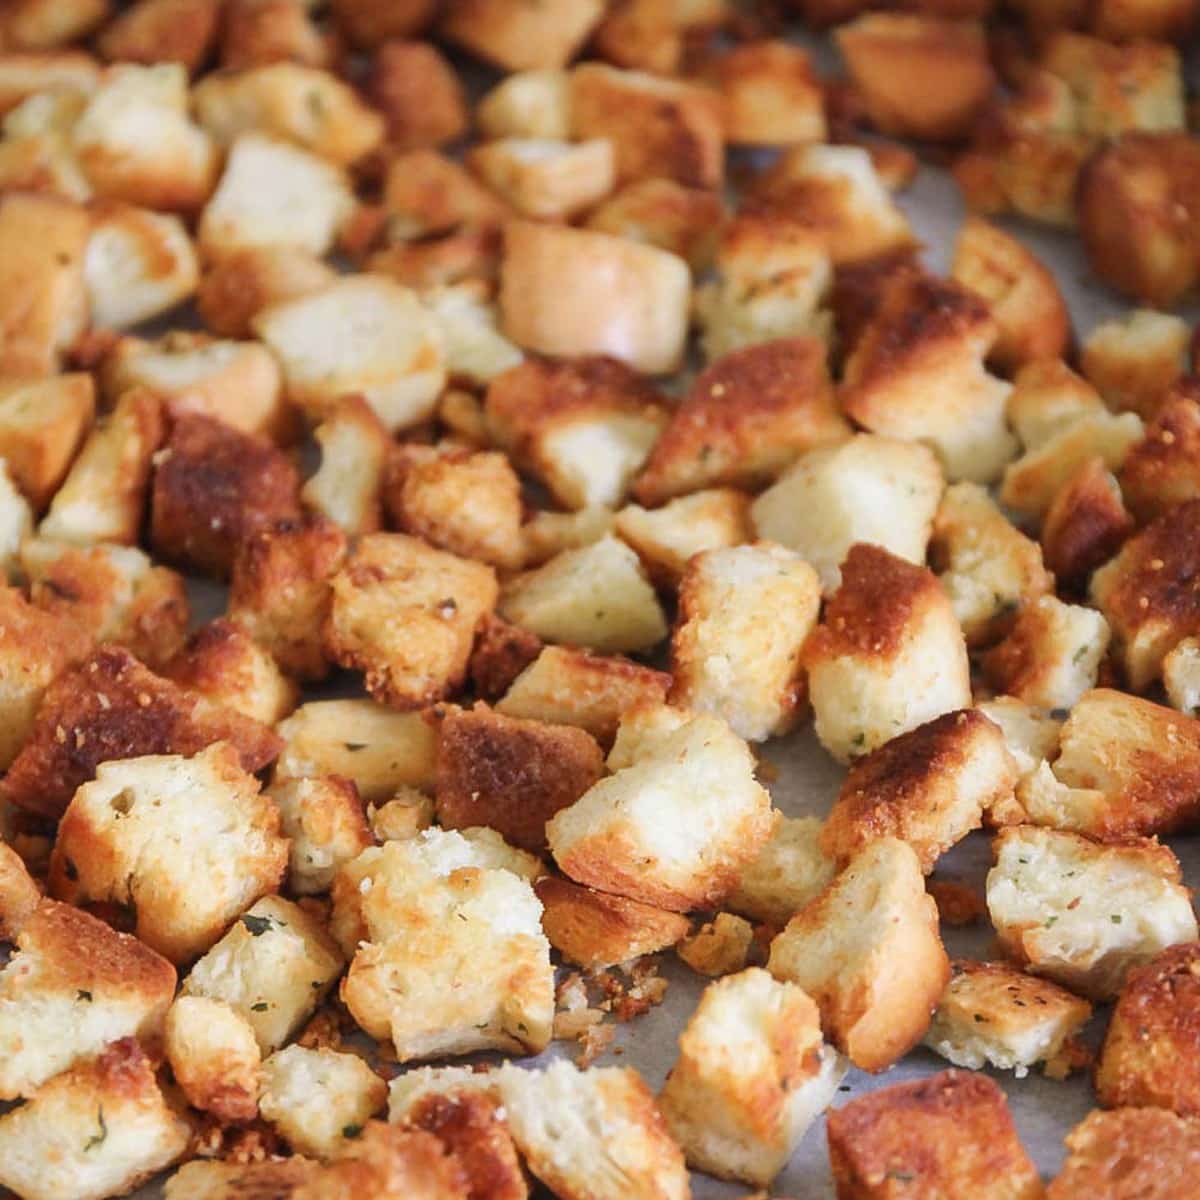 Homemade croutons baked on a cookie sheet.